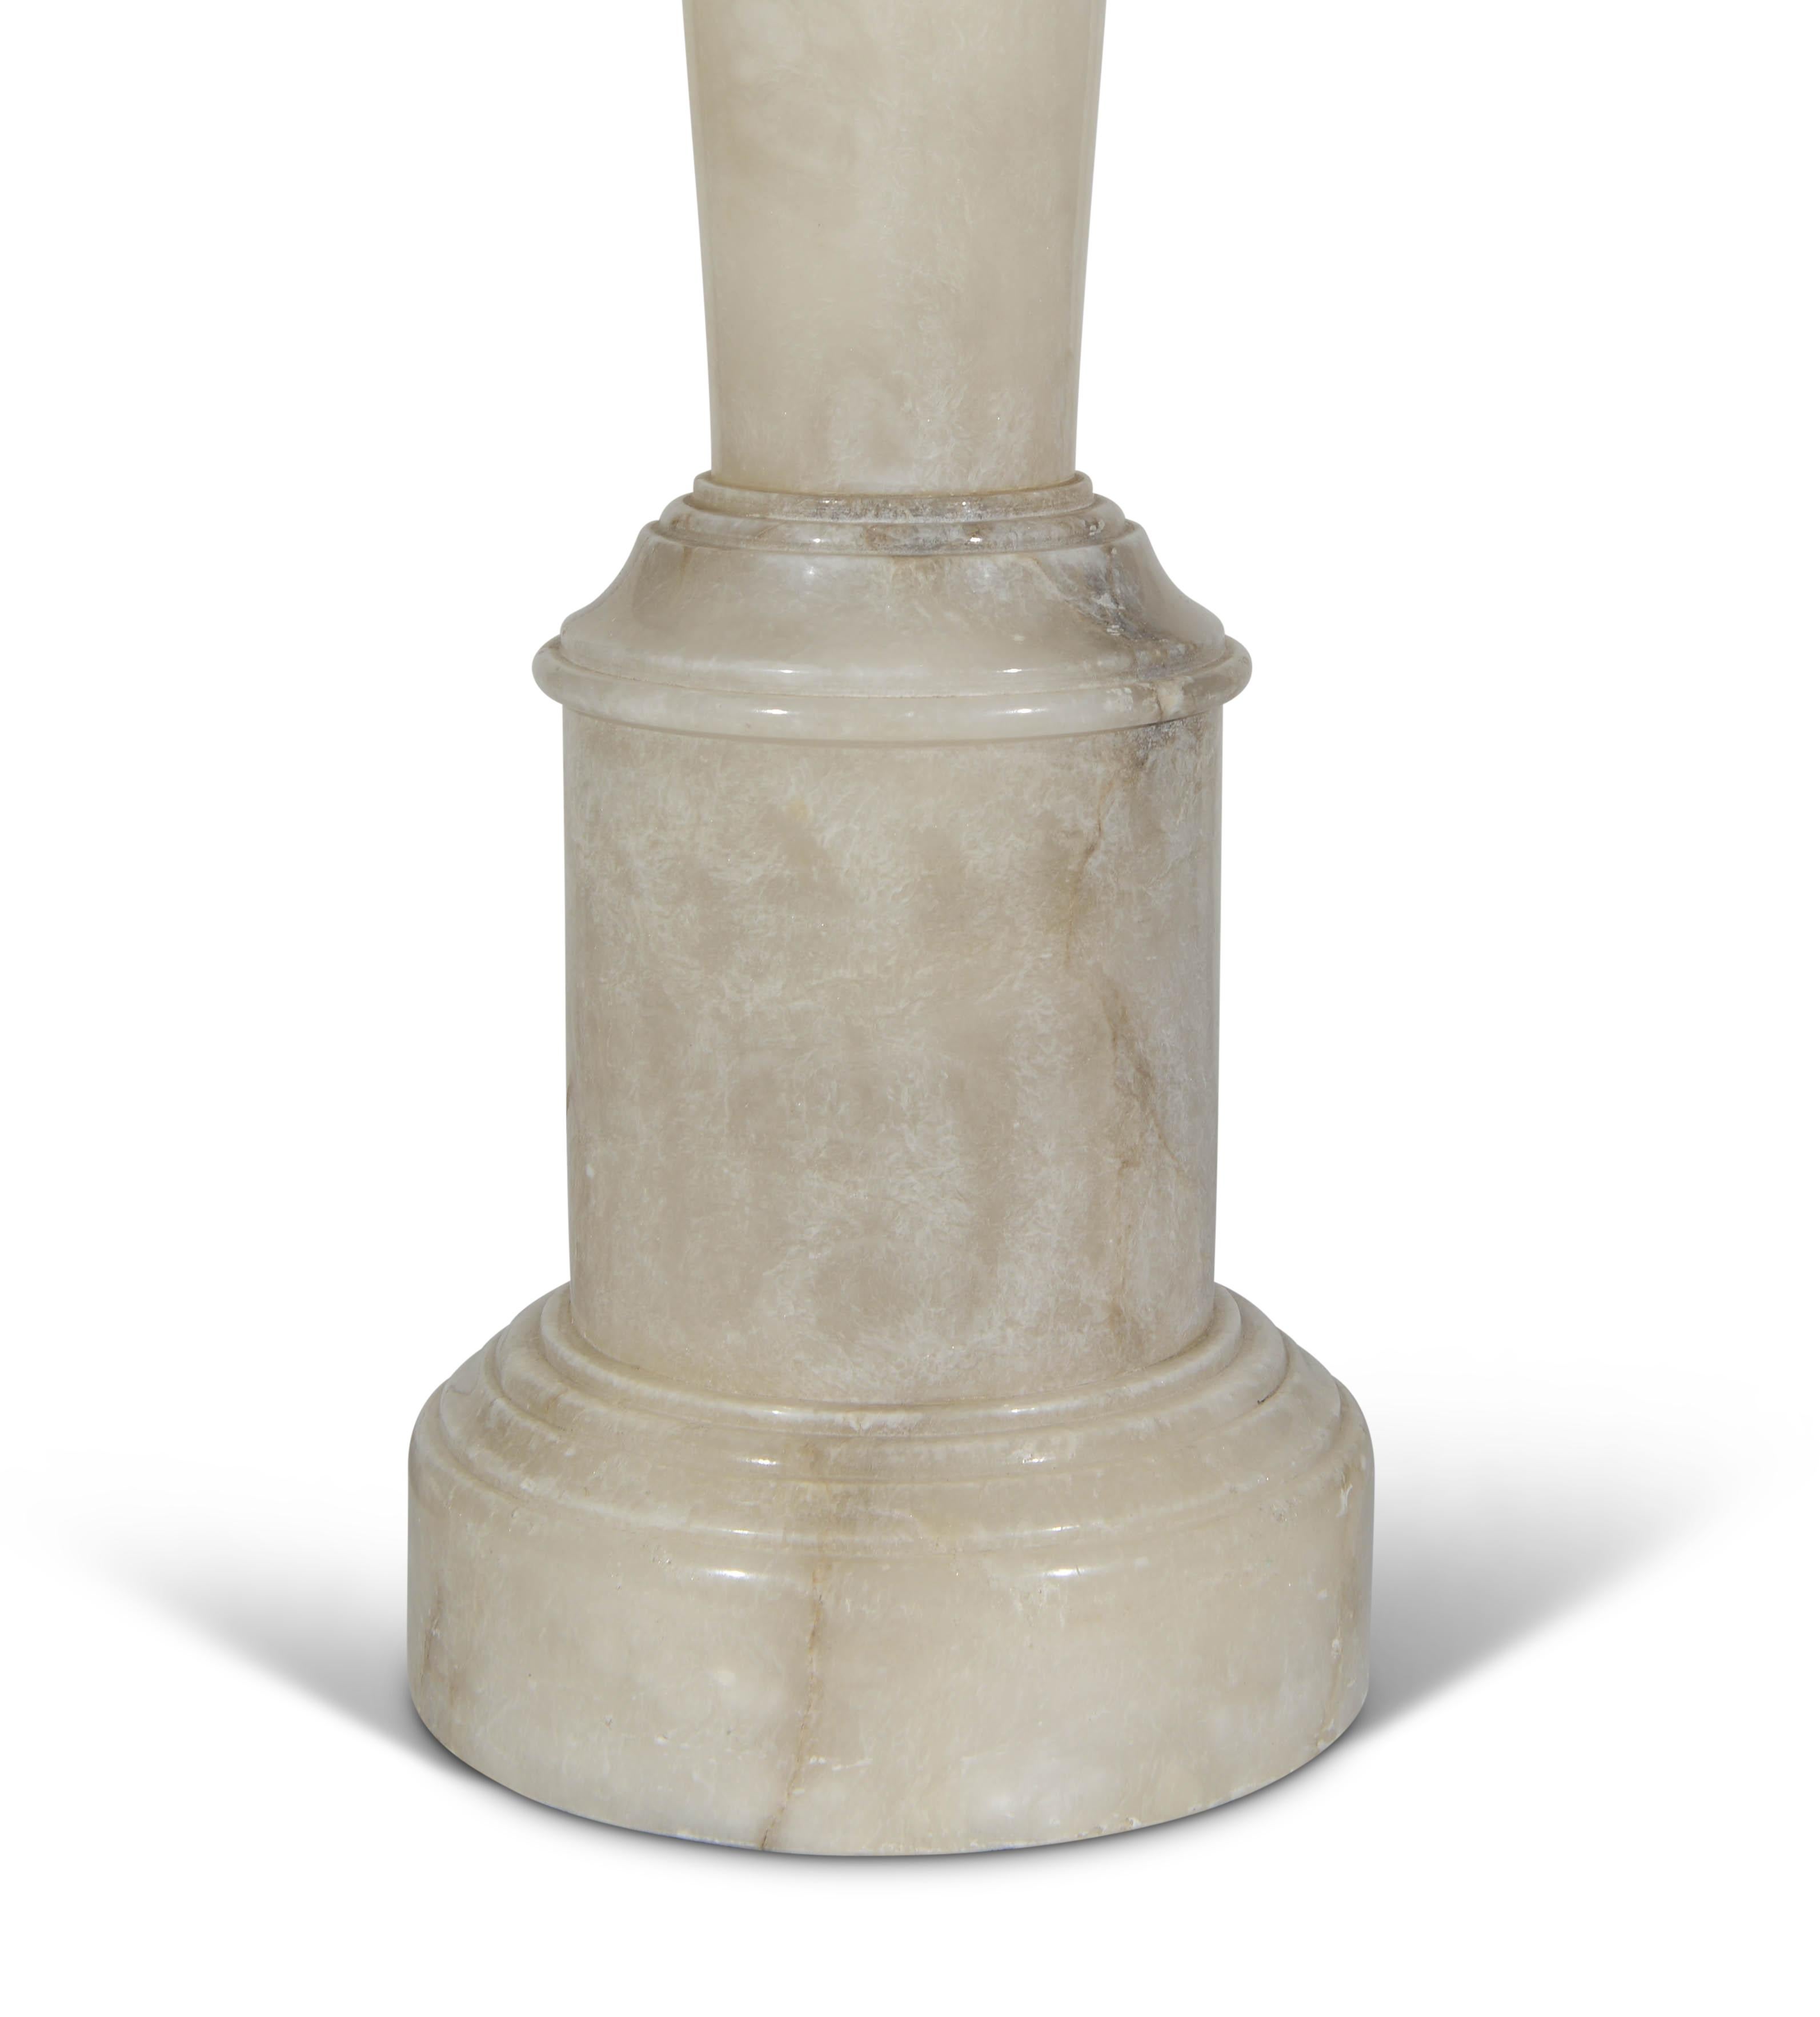 A fine early 20th century onyx column lamp with stepped plinth base. In the neo-classical taste.

Height of lamp: 24 in (61 cm) excluding electrical fitment and lampshade.

All of our lamps can be wired for use worldwide. A selection of card, linen